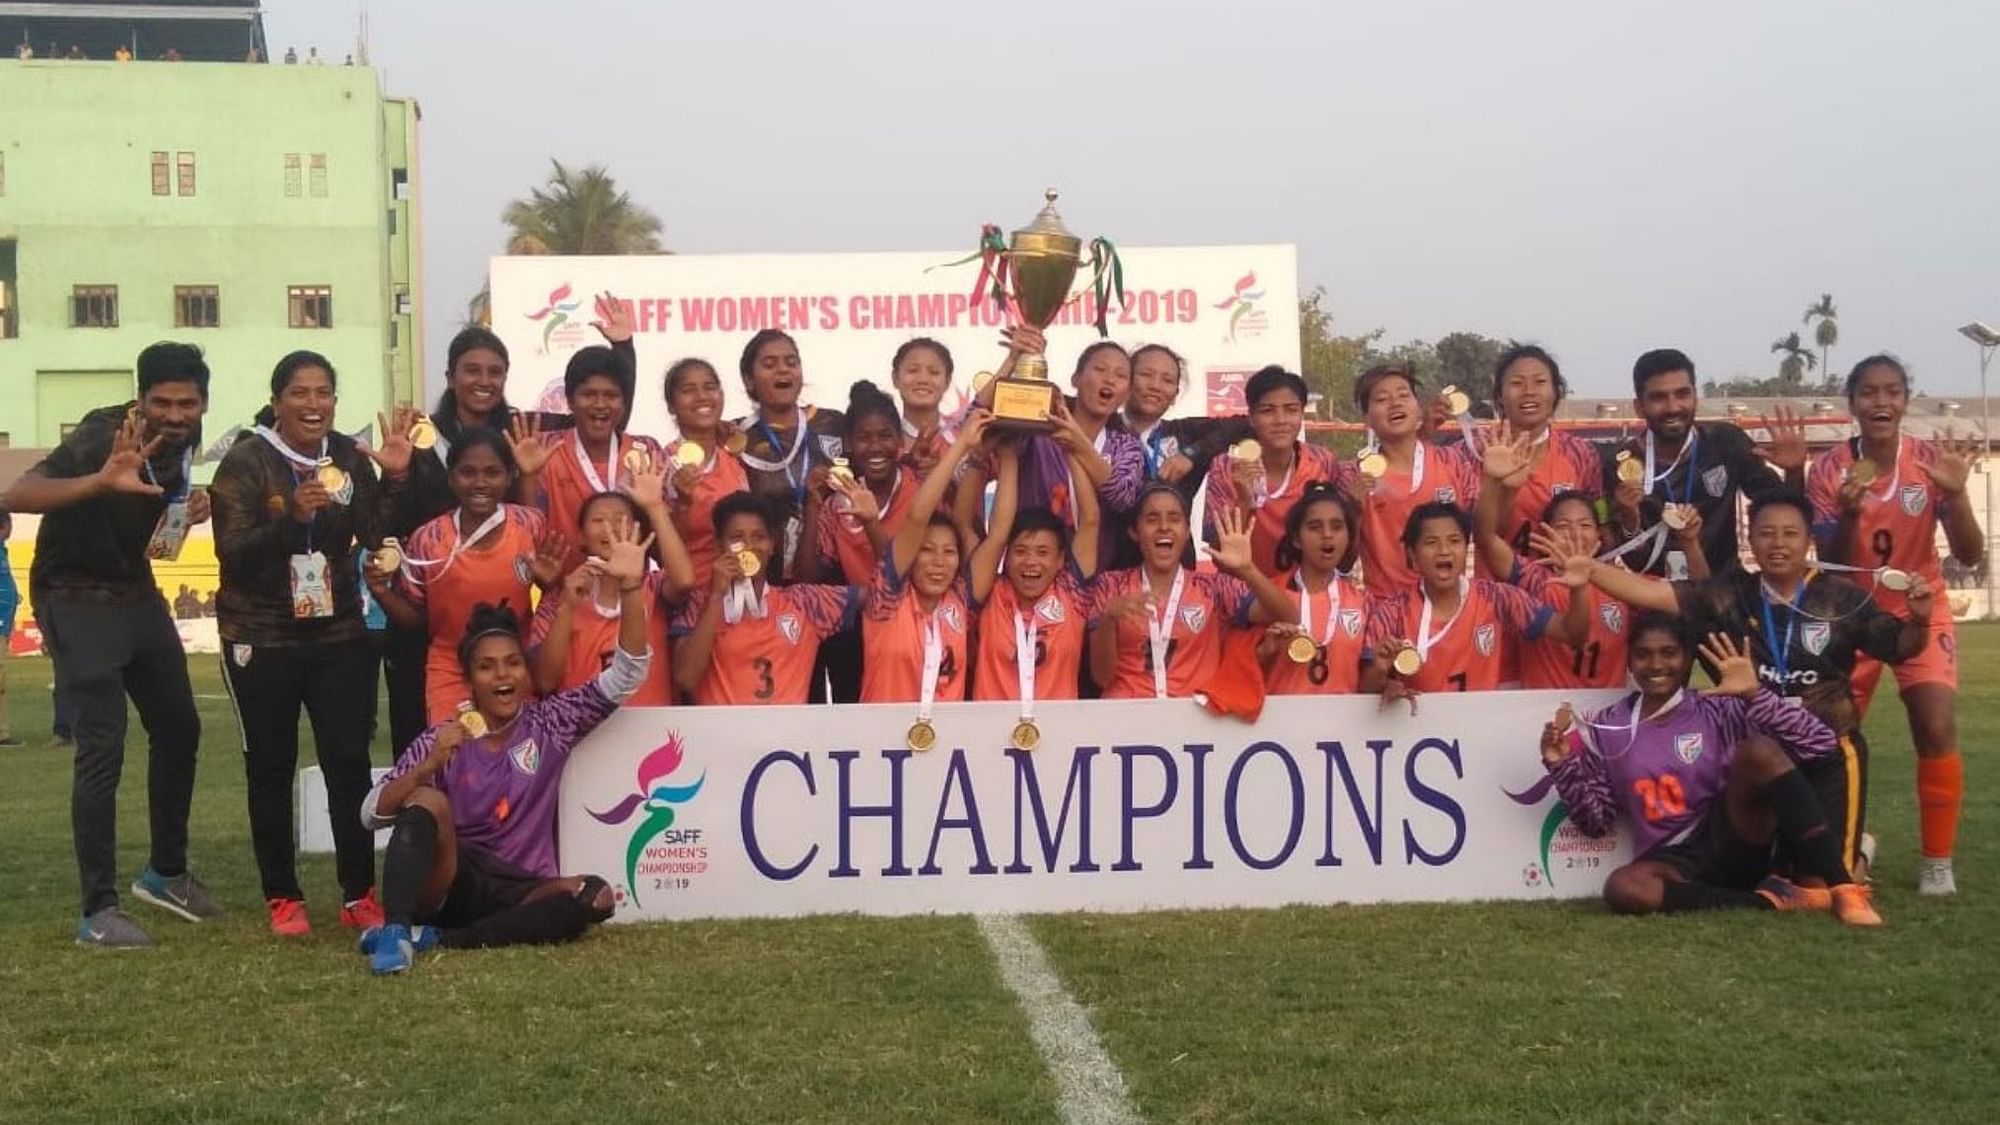 India continued its dominance at the SAFF Women’s Championship by lifting its fifth straight title with a 3-1 victory over hosts Nepal 